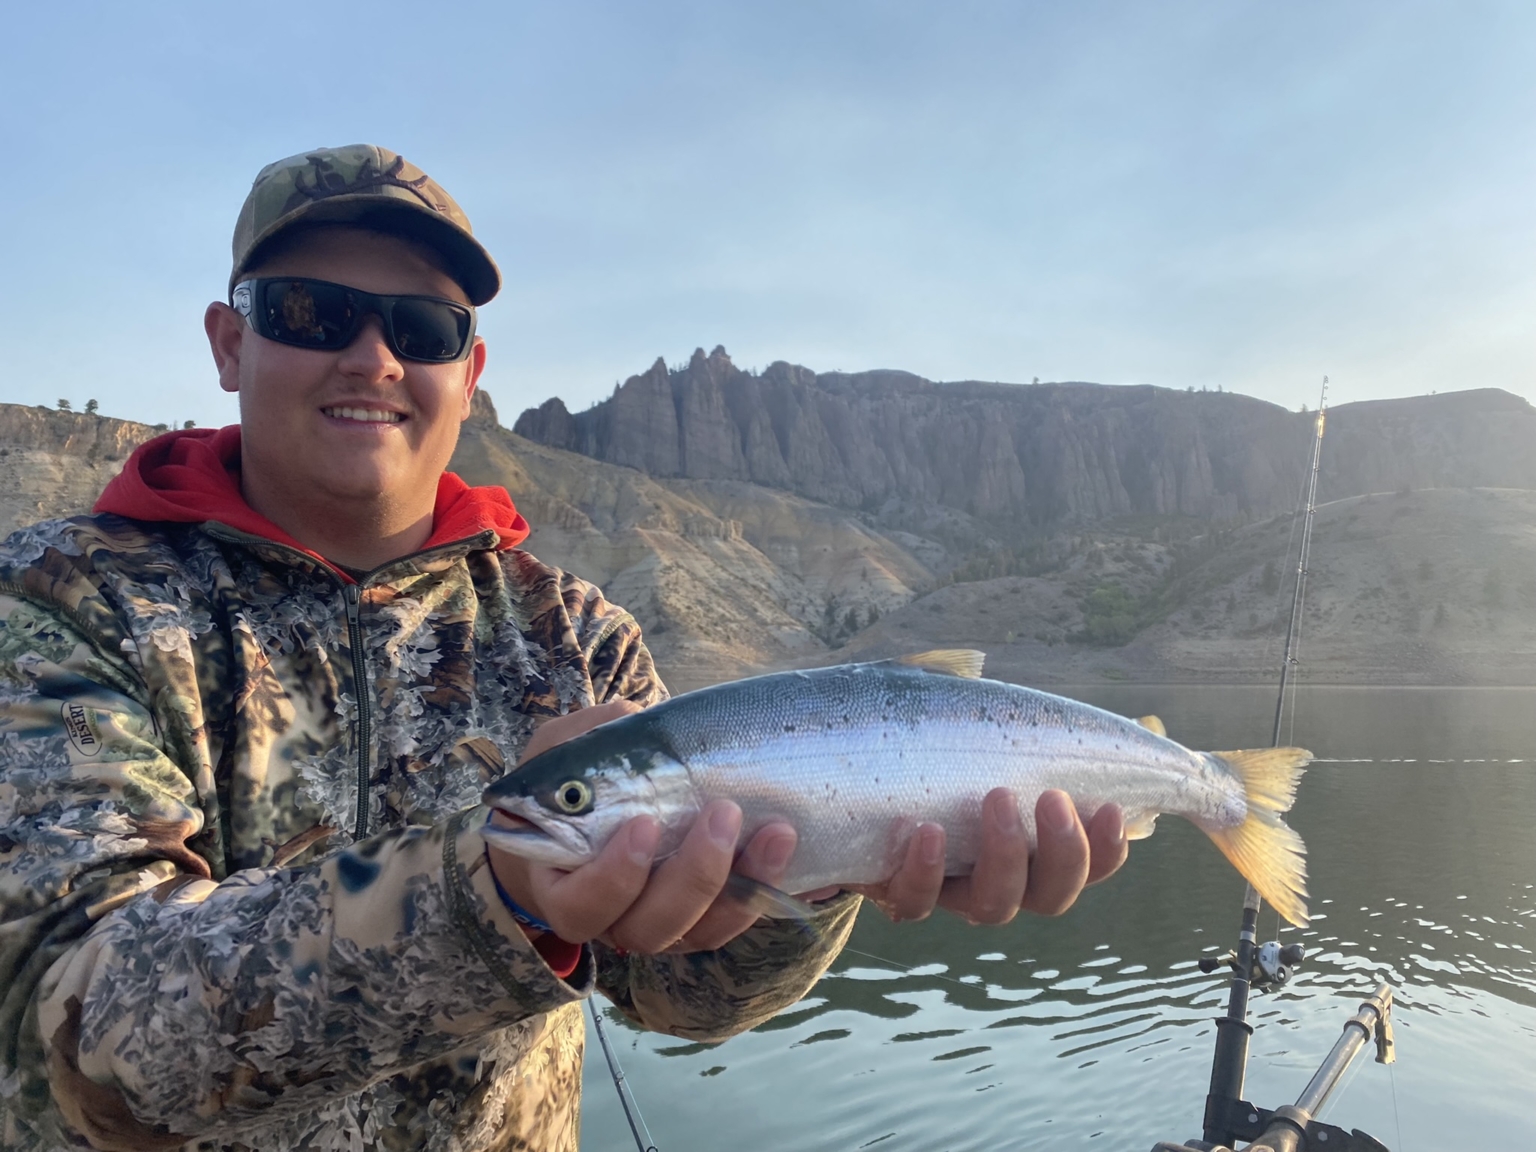 Blue Mesa Fishing Report things are looking up, compared to a year ago